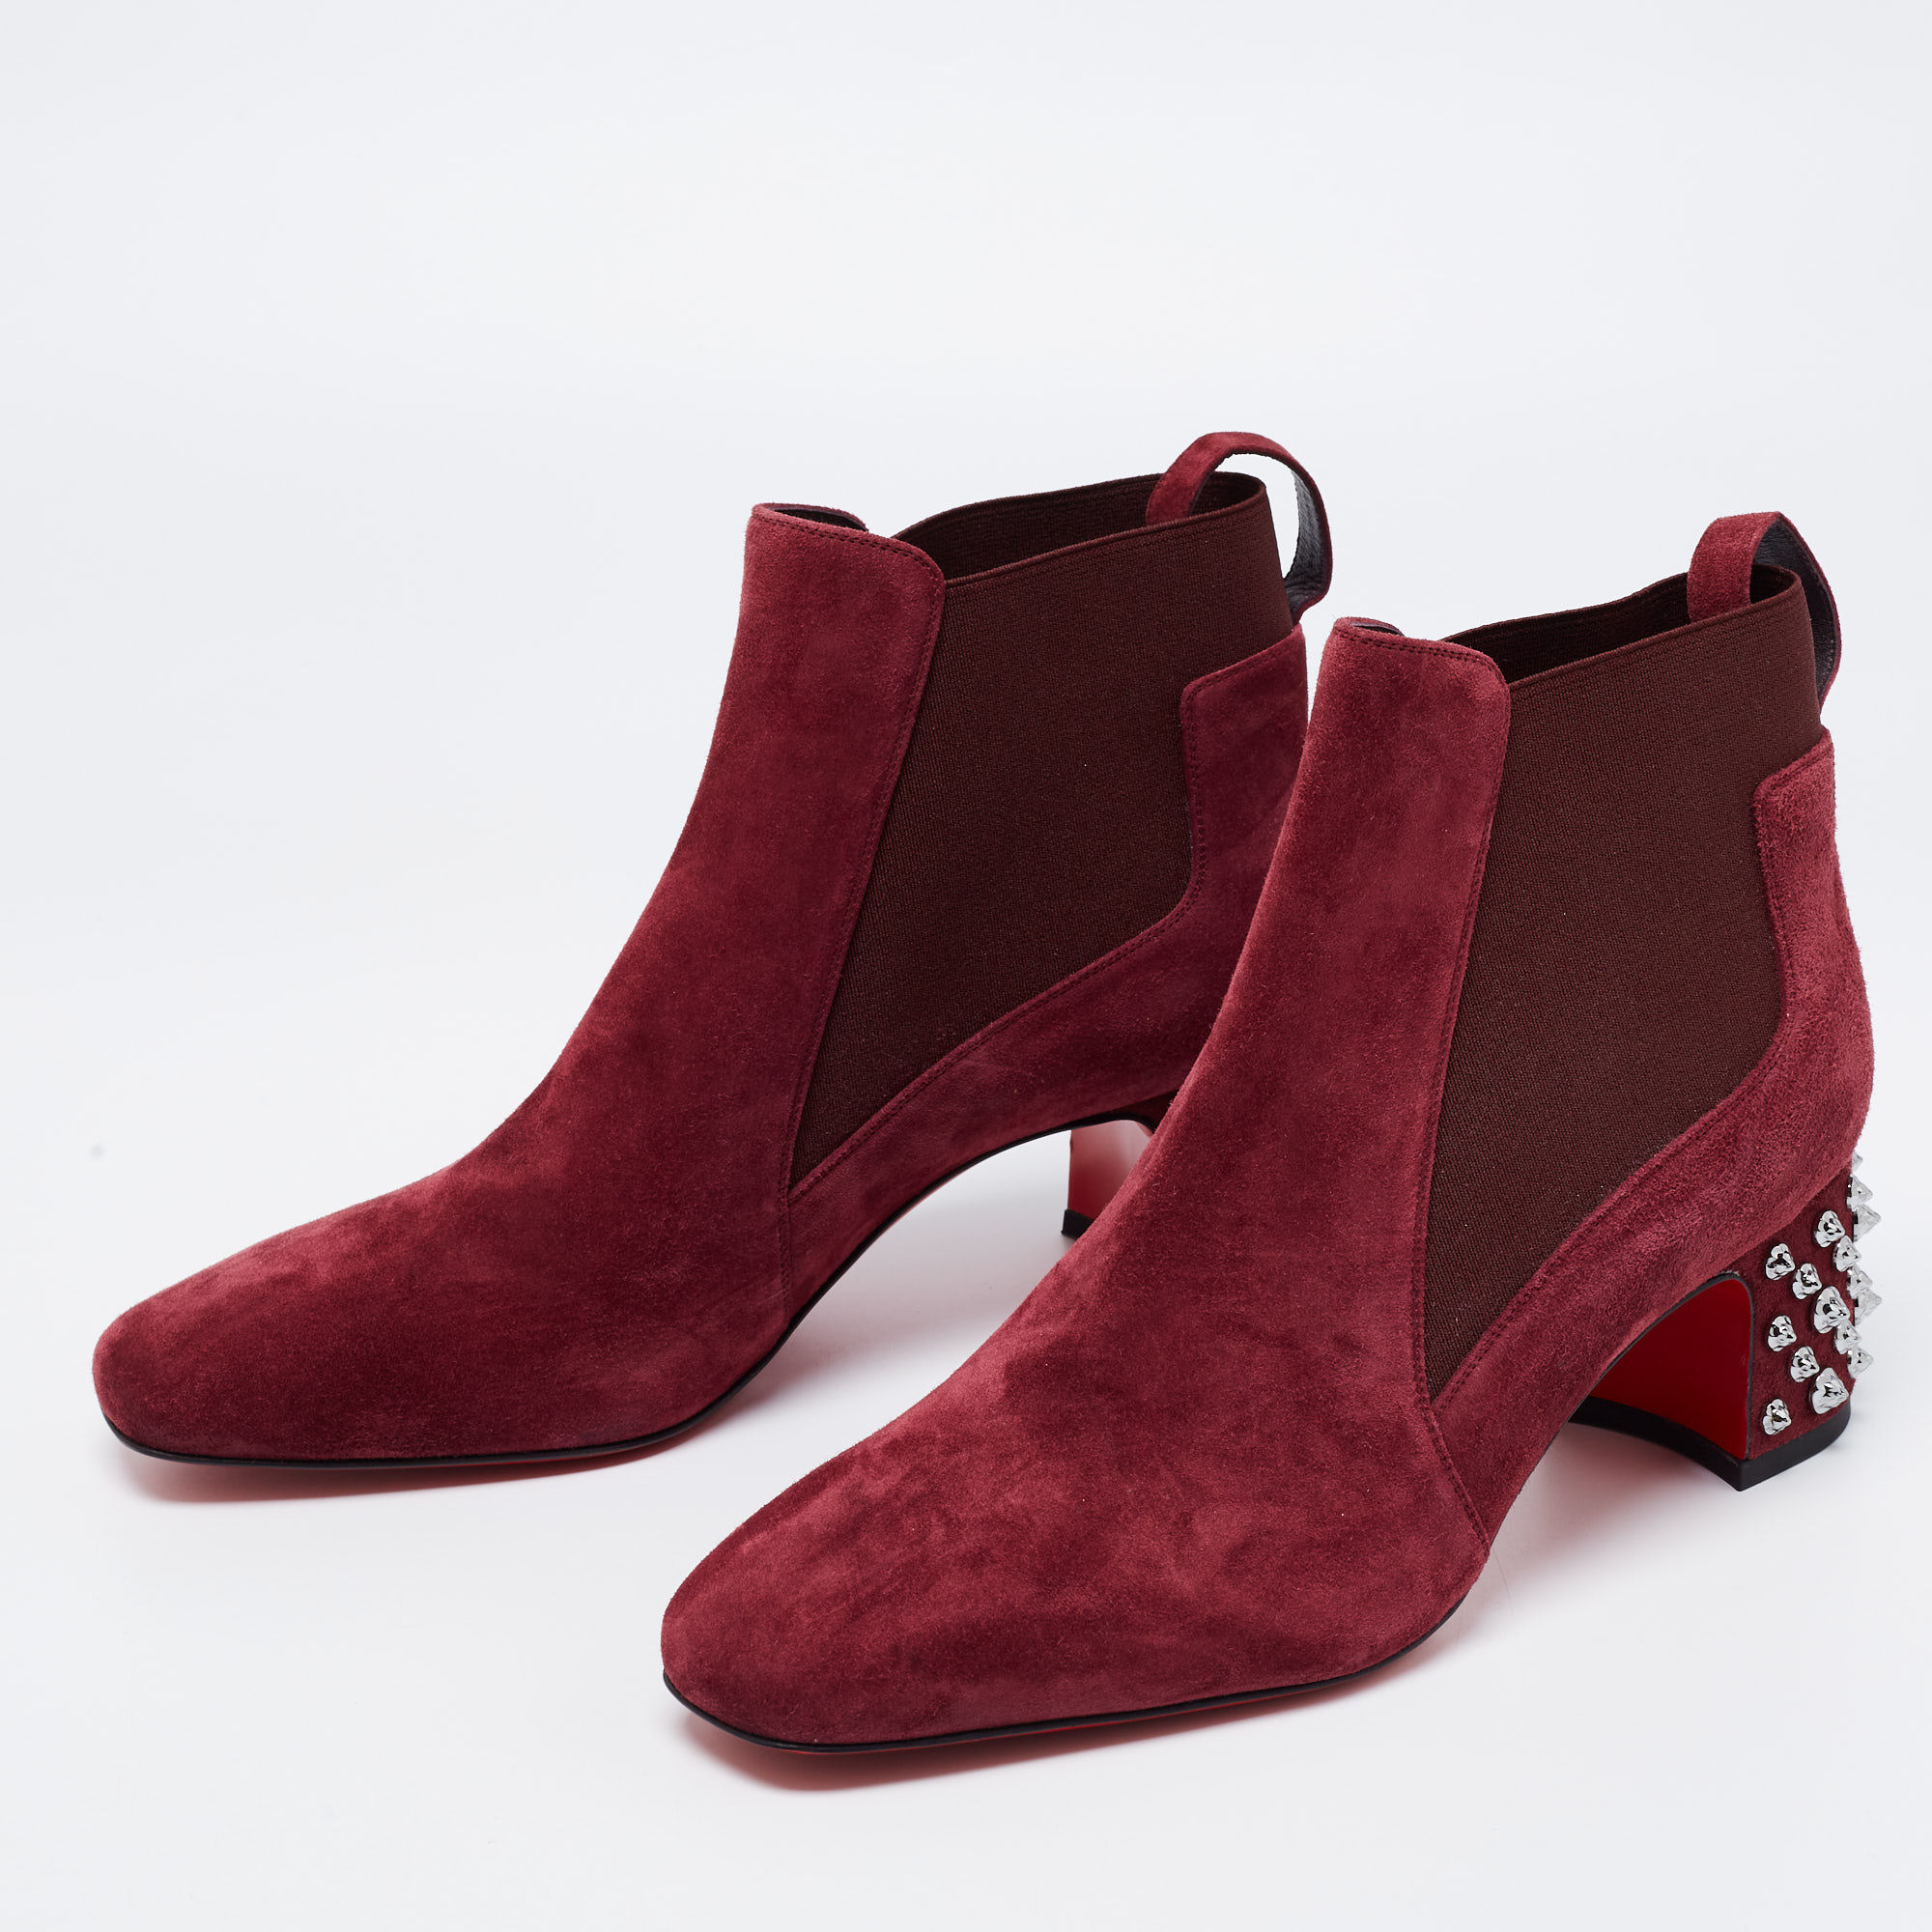 

Christian Louboutin Burgundy Suede Study Spike Ankle Boots Size